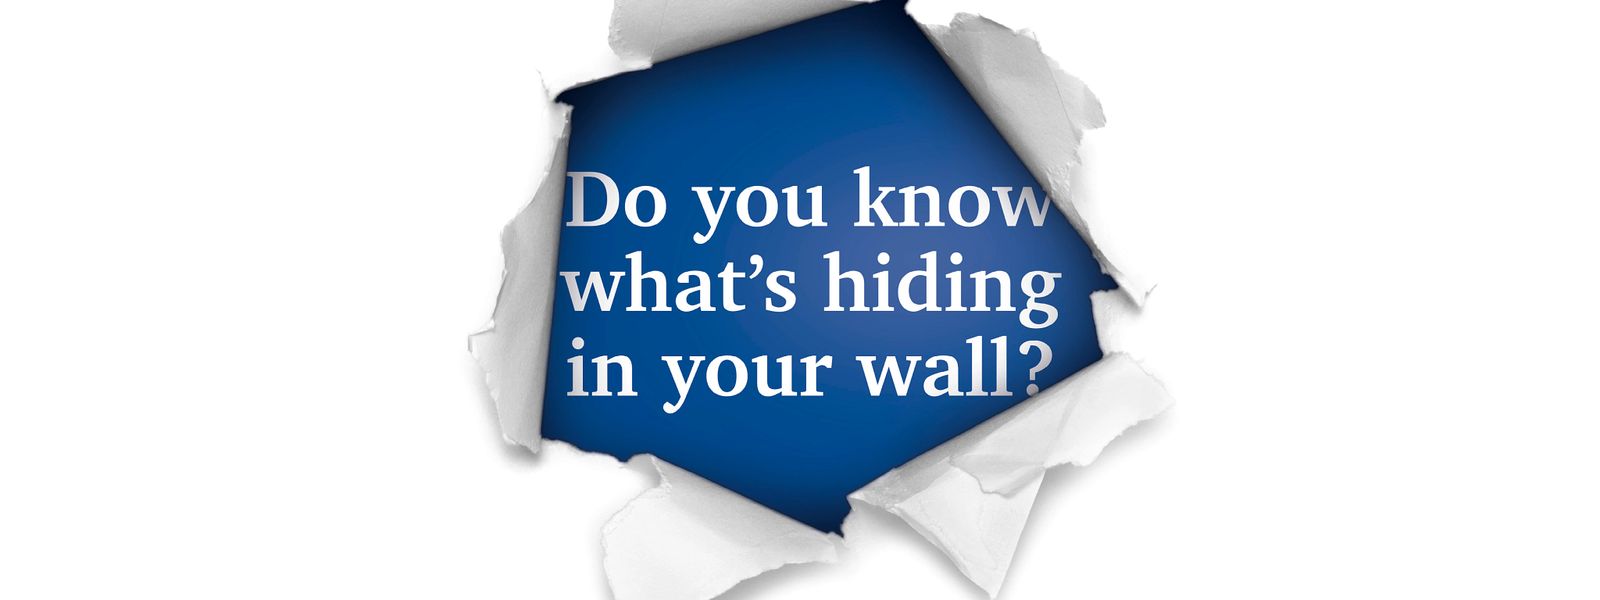 Whats hiding in your wall.jpg